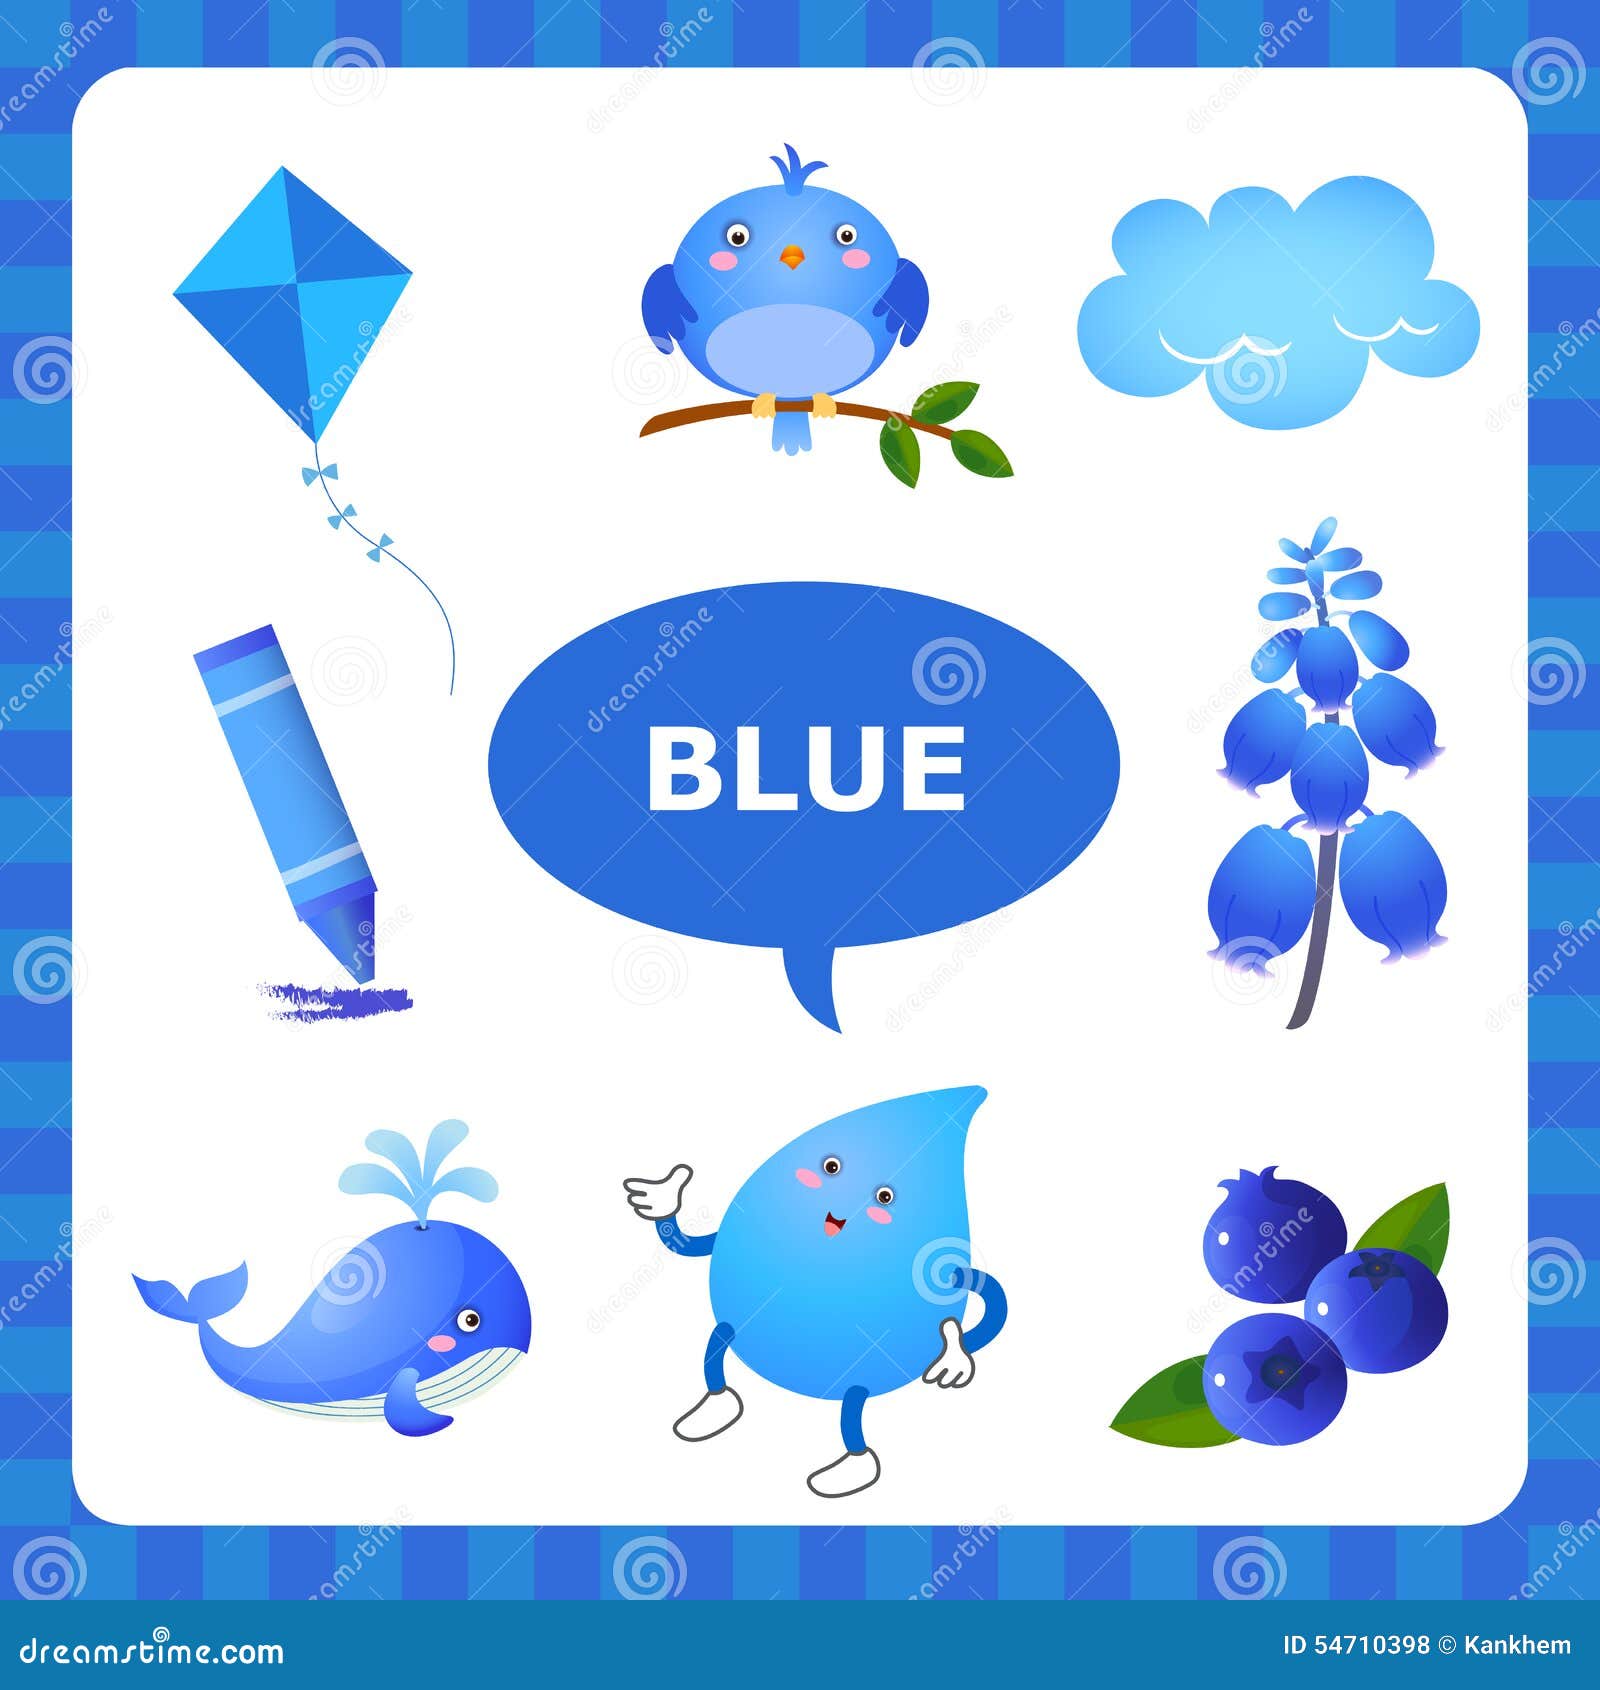 blue objects clipart - photo #12